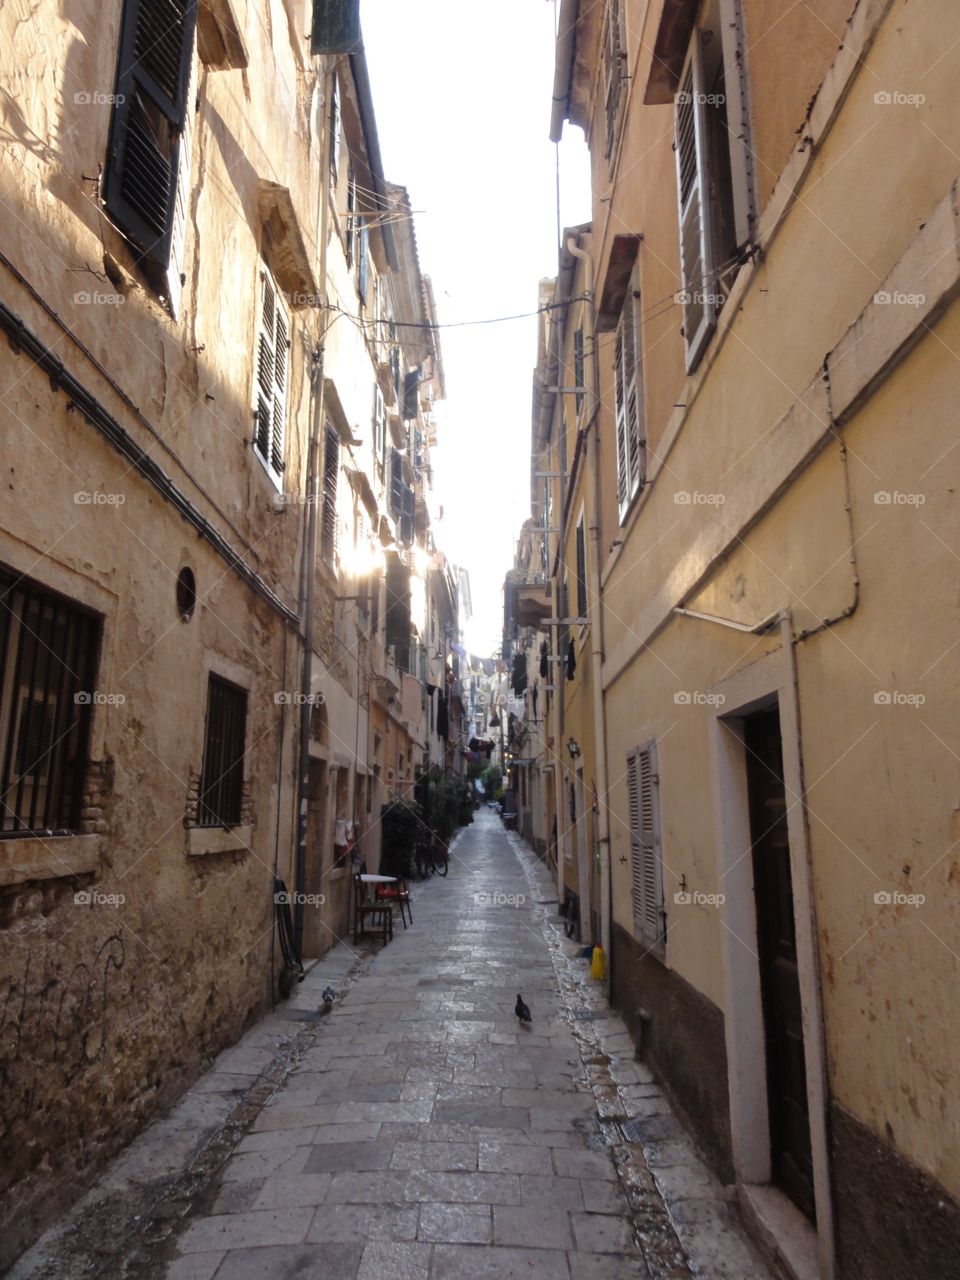 View of alley in street